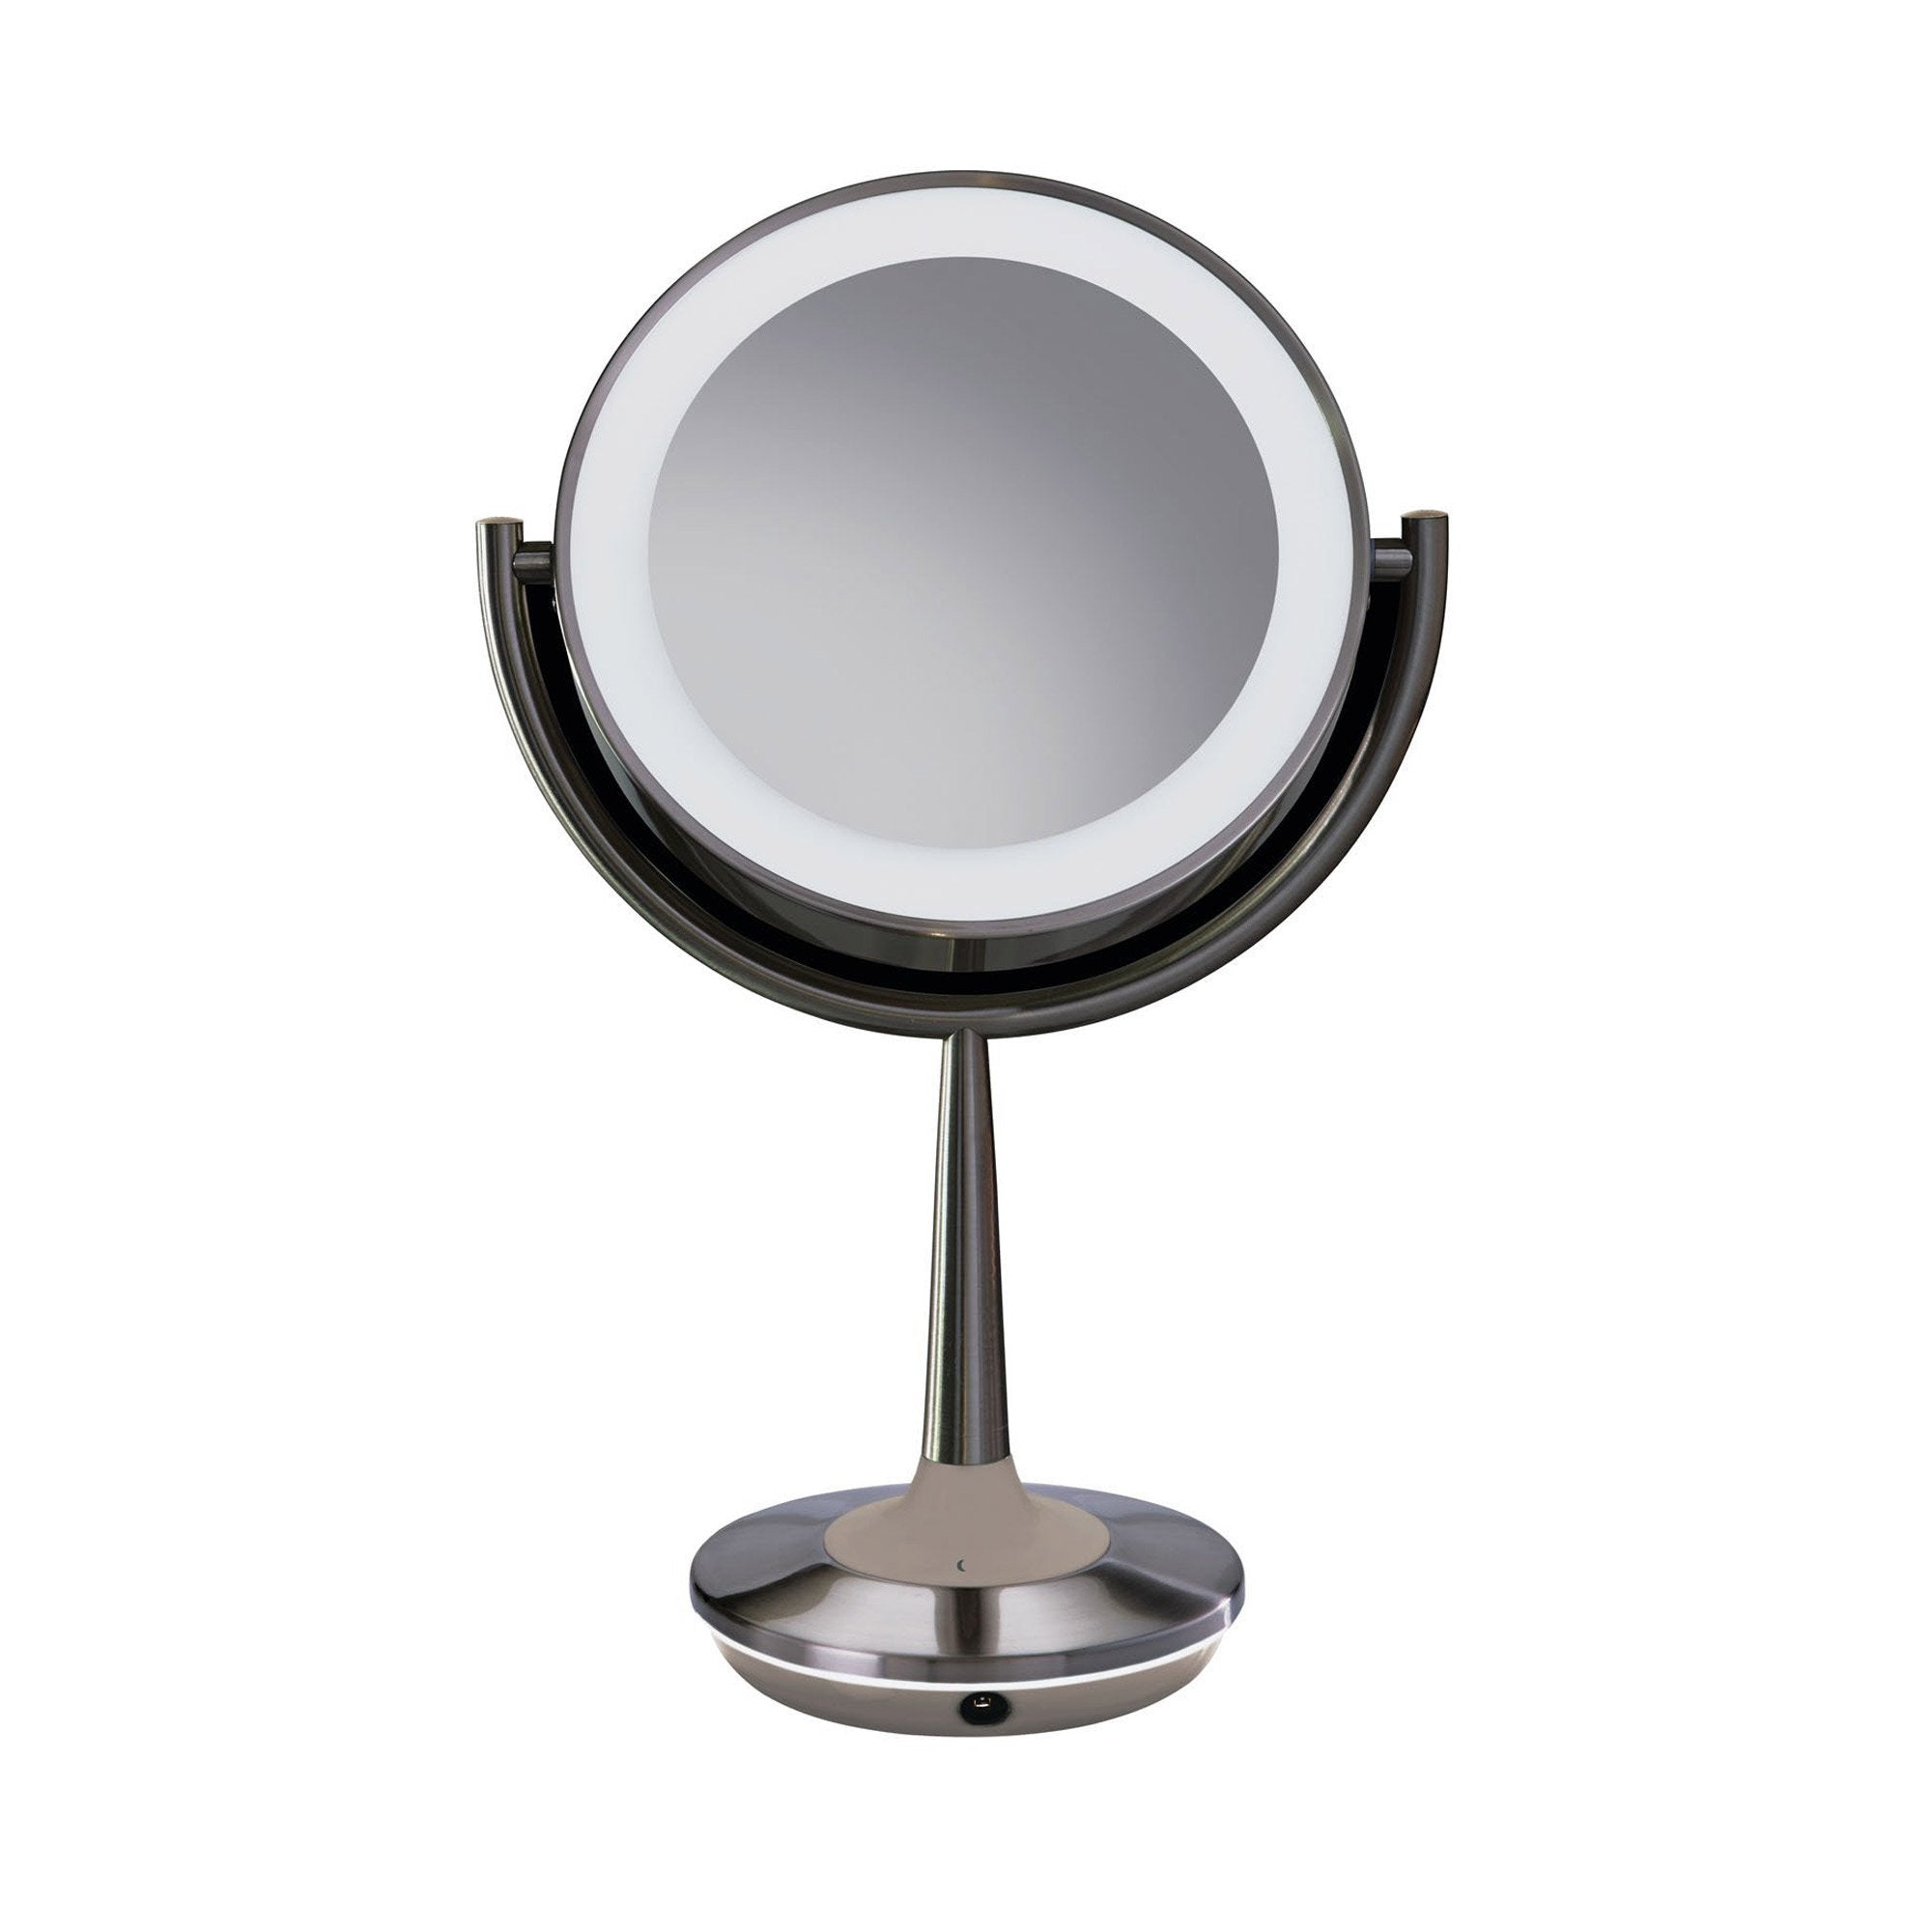 HELLO KITTY LED HANDHELD MAKEUP MIRROR WITH STANDING BASE